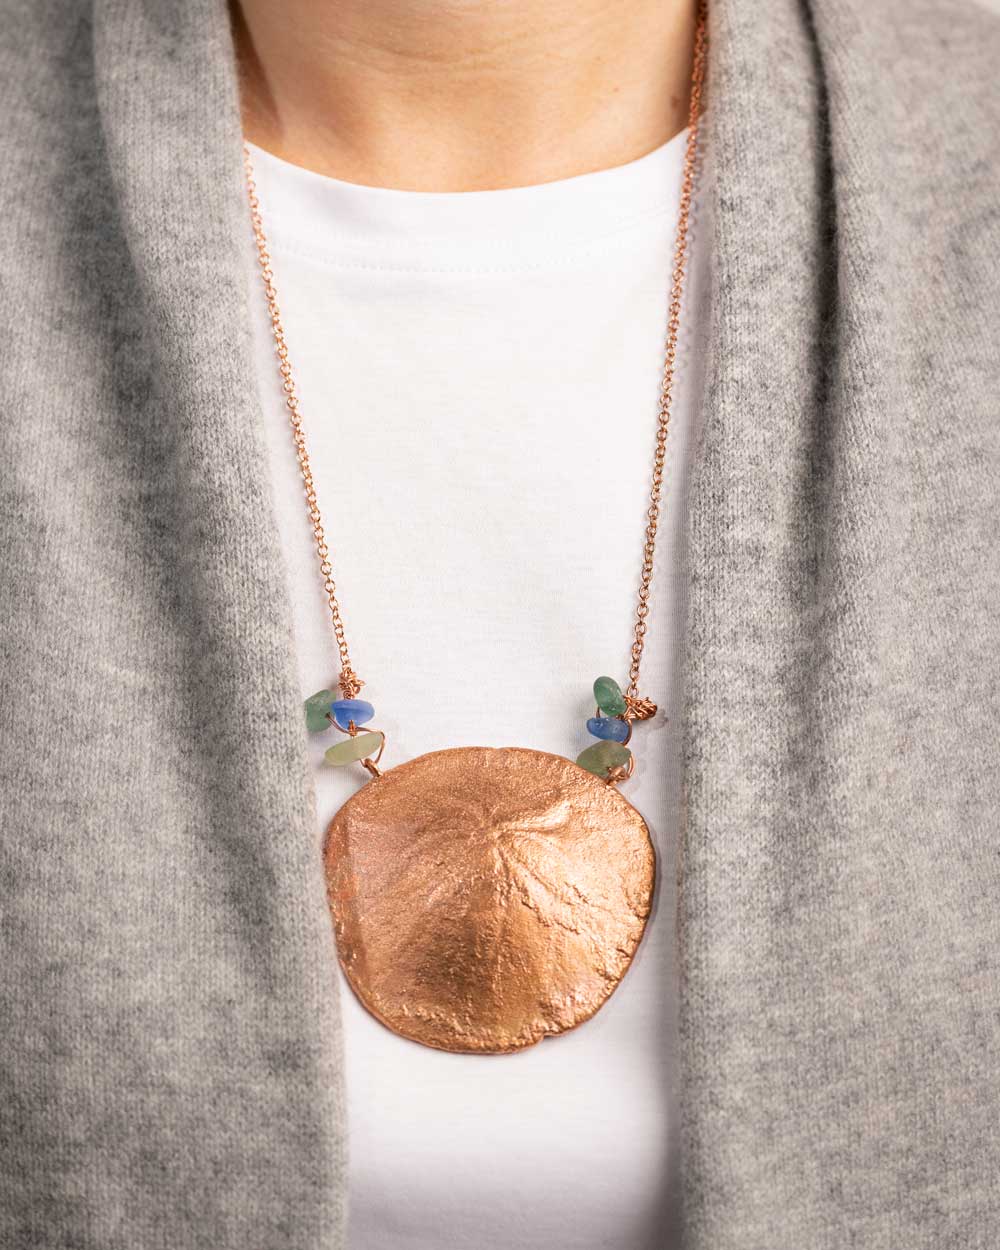 sand dollar necklace with sea glass